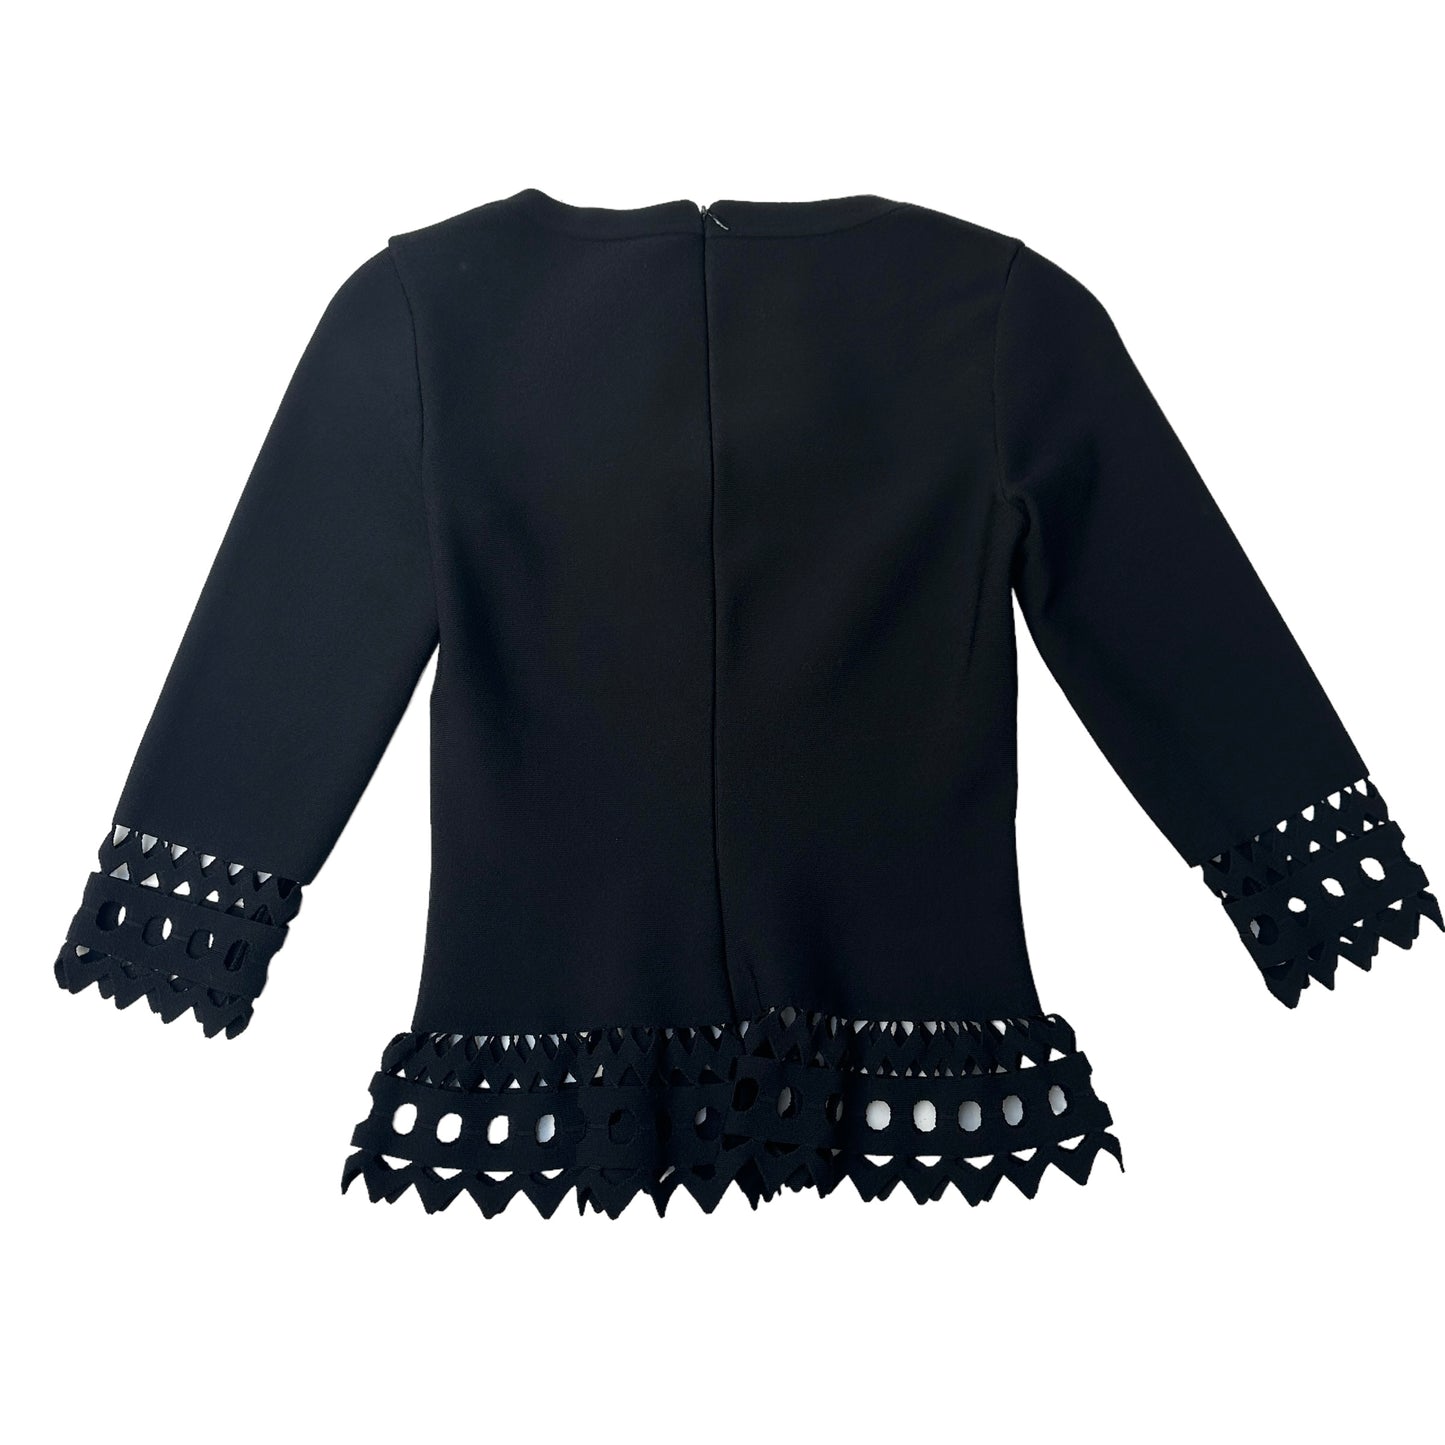 Black Fitted Eyelet Top - S